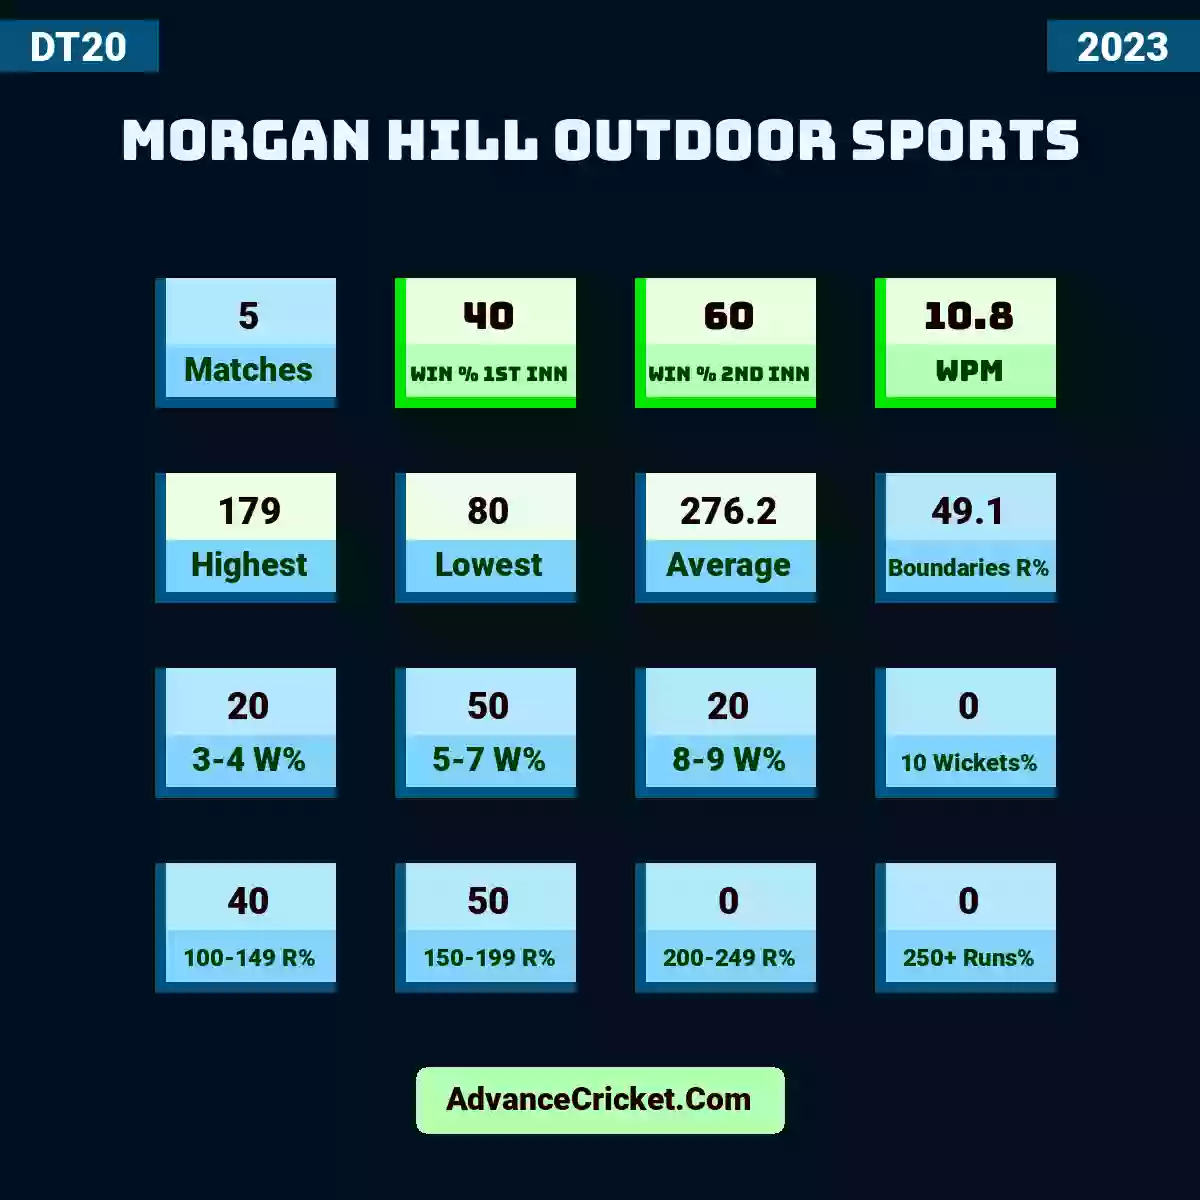 Image showing Morgan Hill Outdoor Sports with Matches: 5, Win % 1st Inn: 40, Win % 2nd Inn: 60, WPM: 10.8, Highest: 179, Lowest: 80, Average: 276.2, Boundaries R%: 49.1, 3-4 W%: 20, 5-7 W%: 50, 8-9 W%: 20, 10 Wickets%: 0, 100-149 R%: 40, 150-199 R%: 50, 200-249 R%: 0, 250+ Runs%: 0.